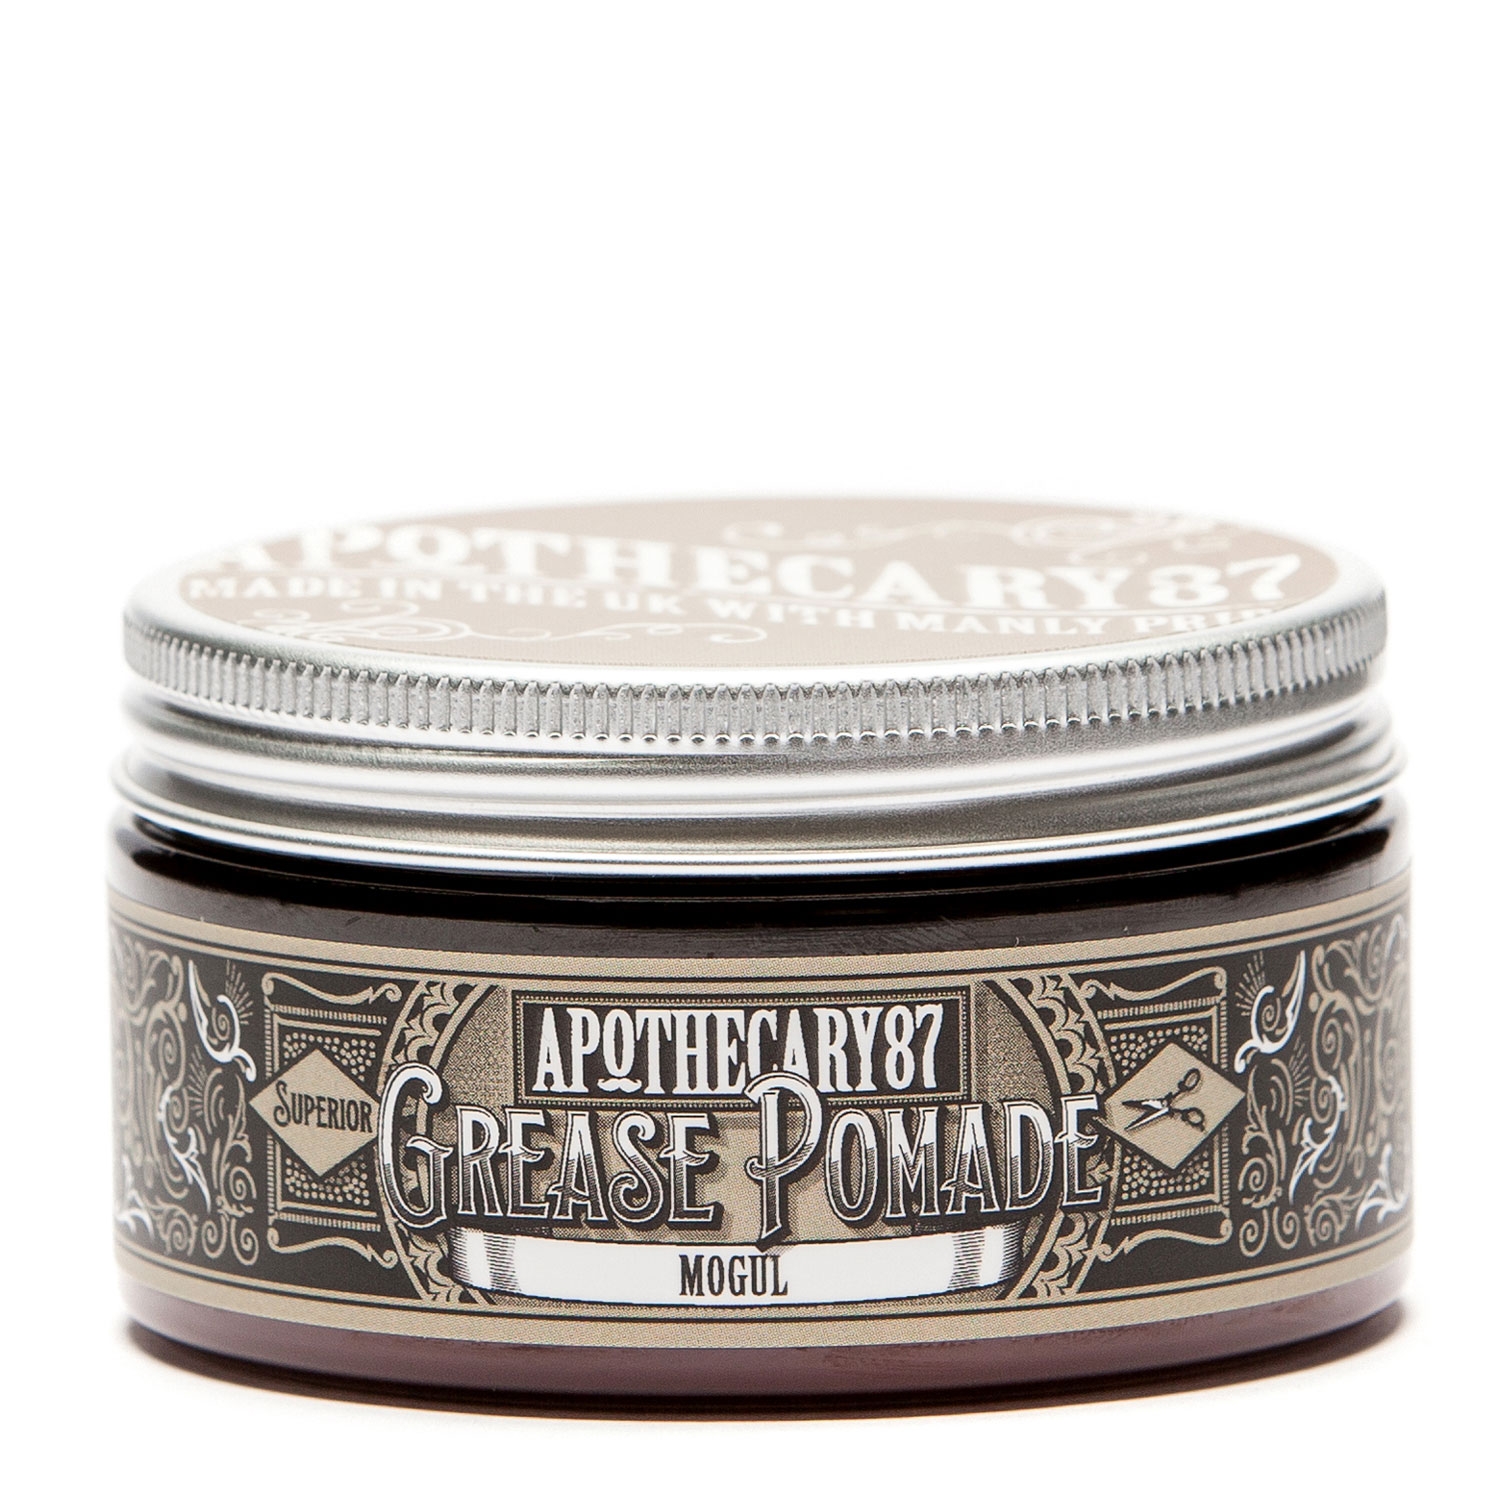 Product image from Apothecary87 Grooming - Grease Pomade Mogul Fragrance